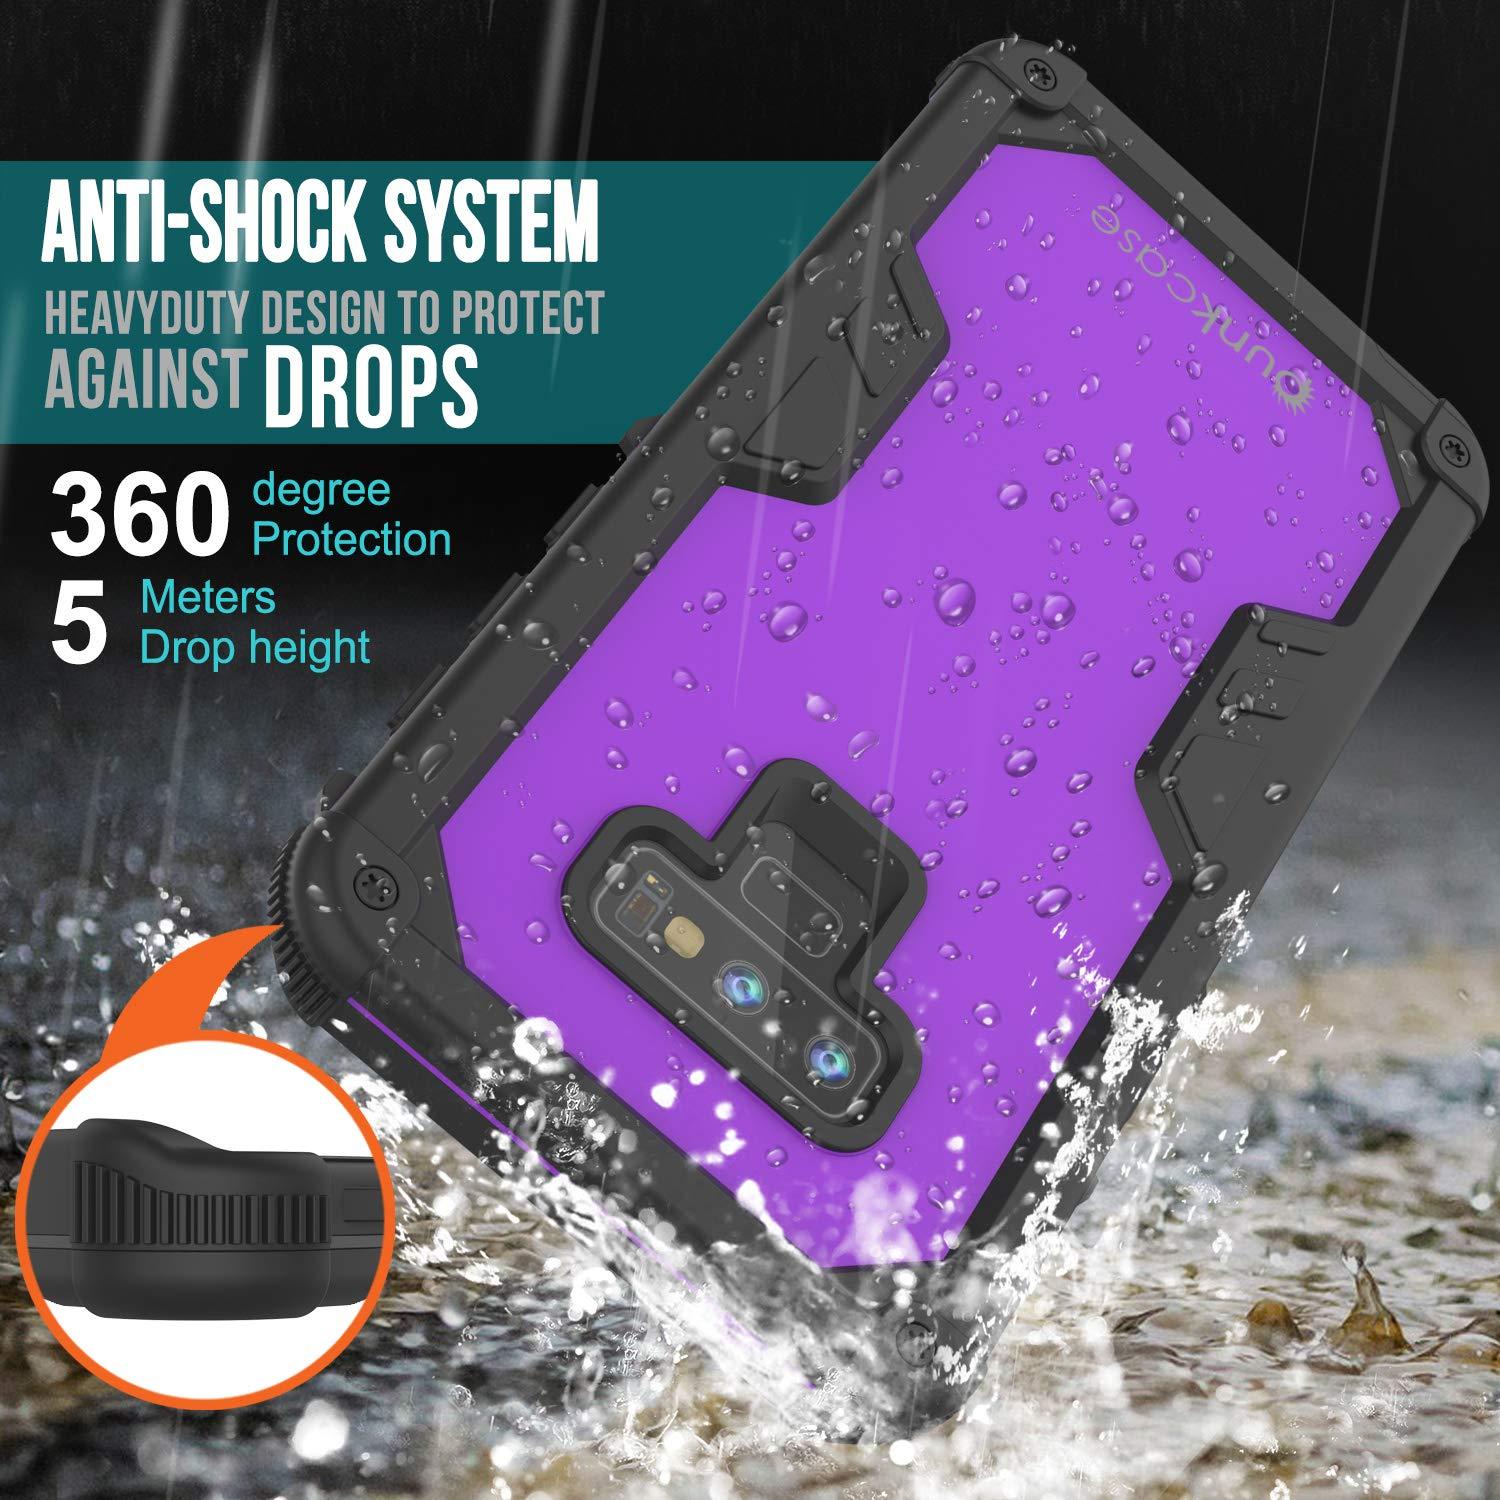 Punkcase Galaxy Note 9 Waterproof Case [Navy Seal Extreme Series] Armor Cover W/ Built In Screen Protector [Purple]